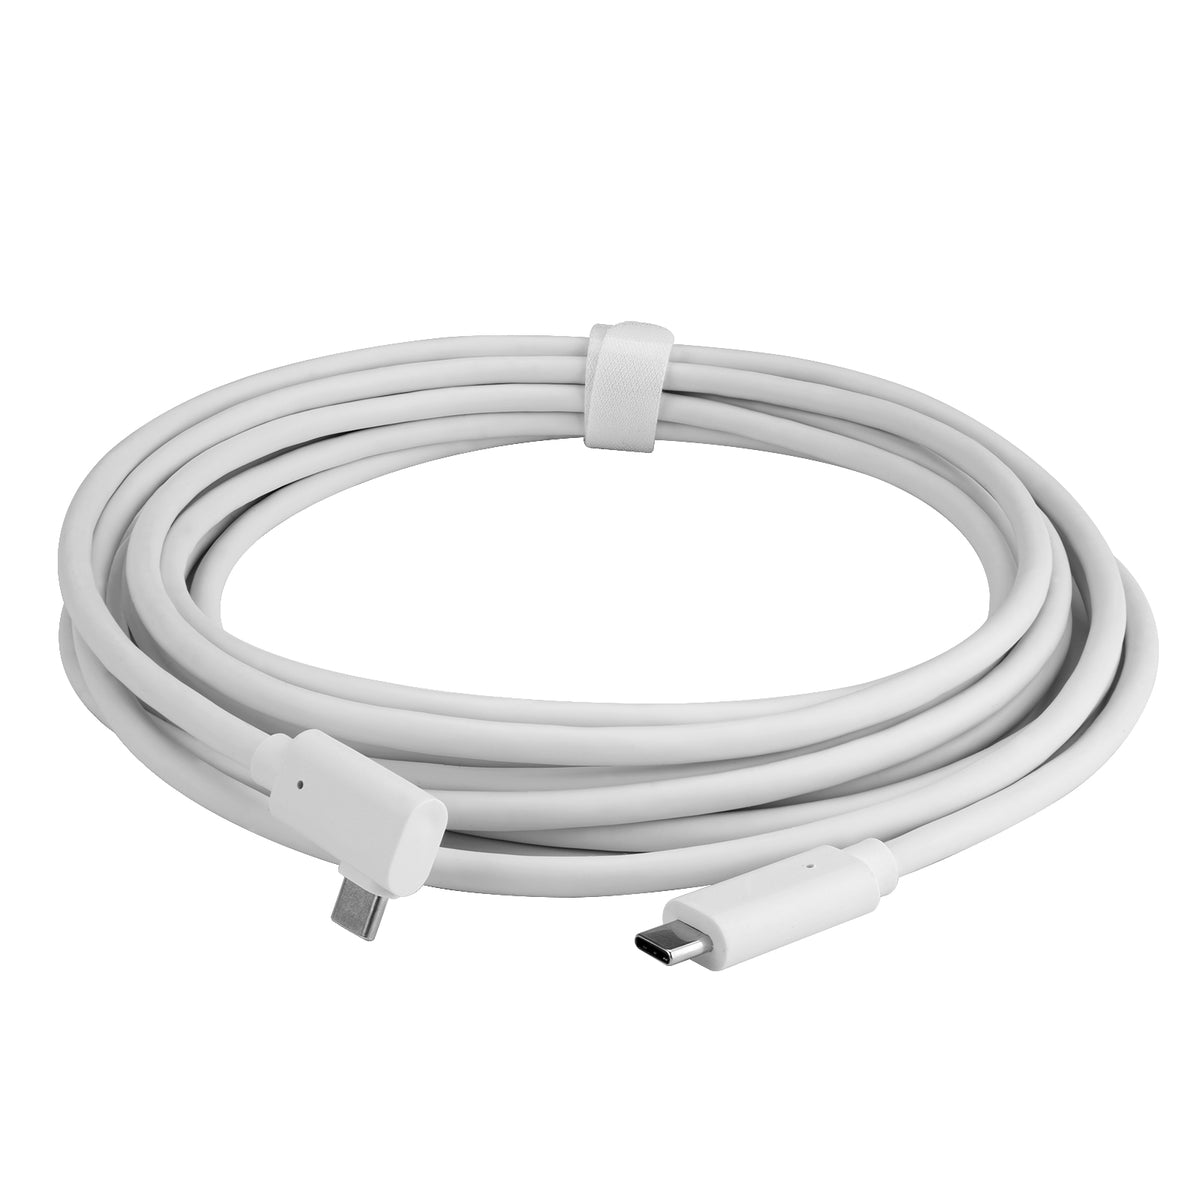 Geekria 16ft Link Cable Compatible with Oculus/Meta Quest Pro, Quest 2